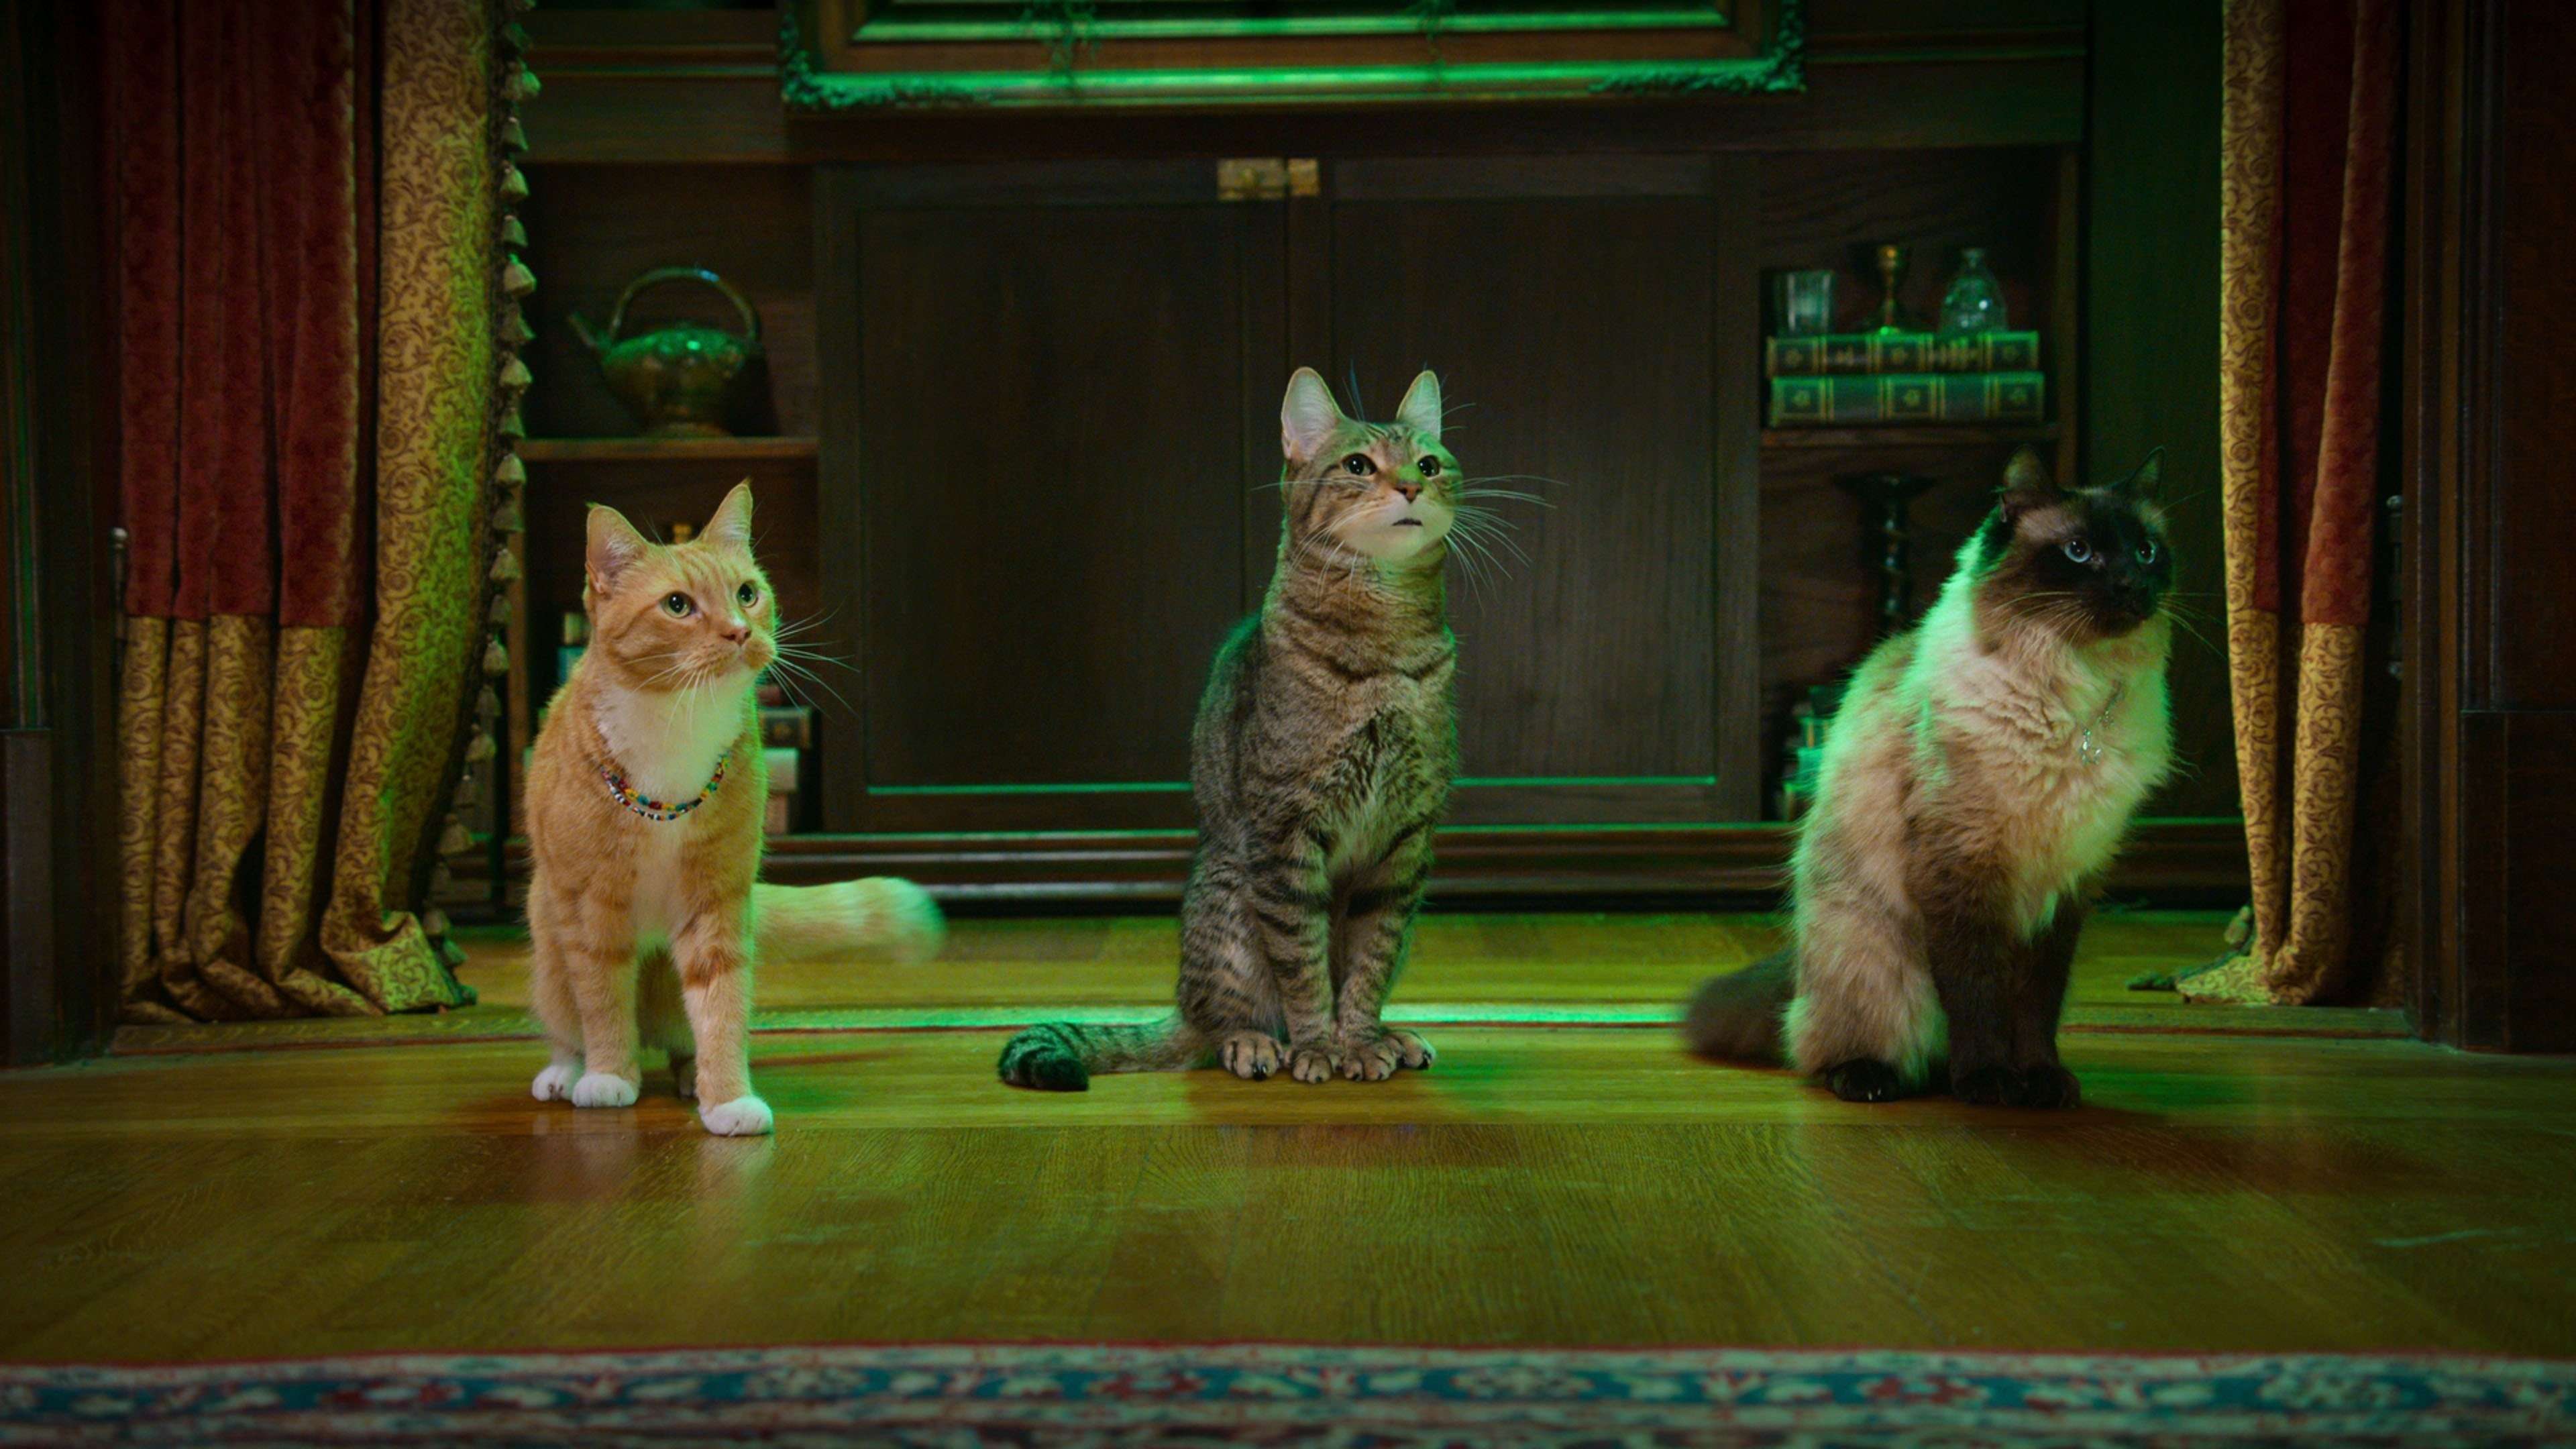 Scaredy Cats Trailer, The new series Scaredy Cats has now premiered on  Netflix! This fun series is about three friends who shape-shift into cats  and explore a wicked world of